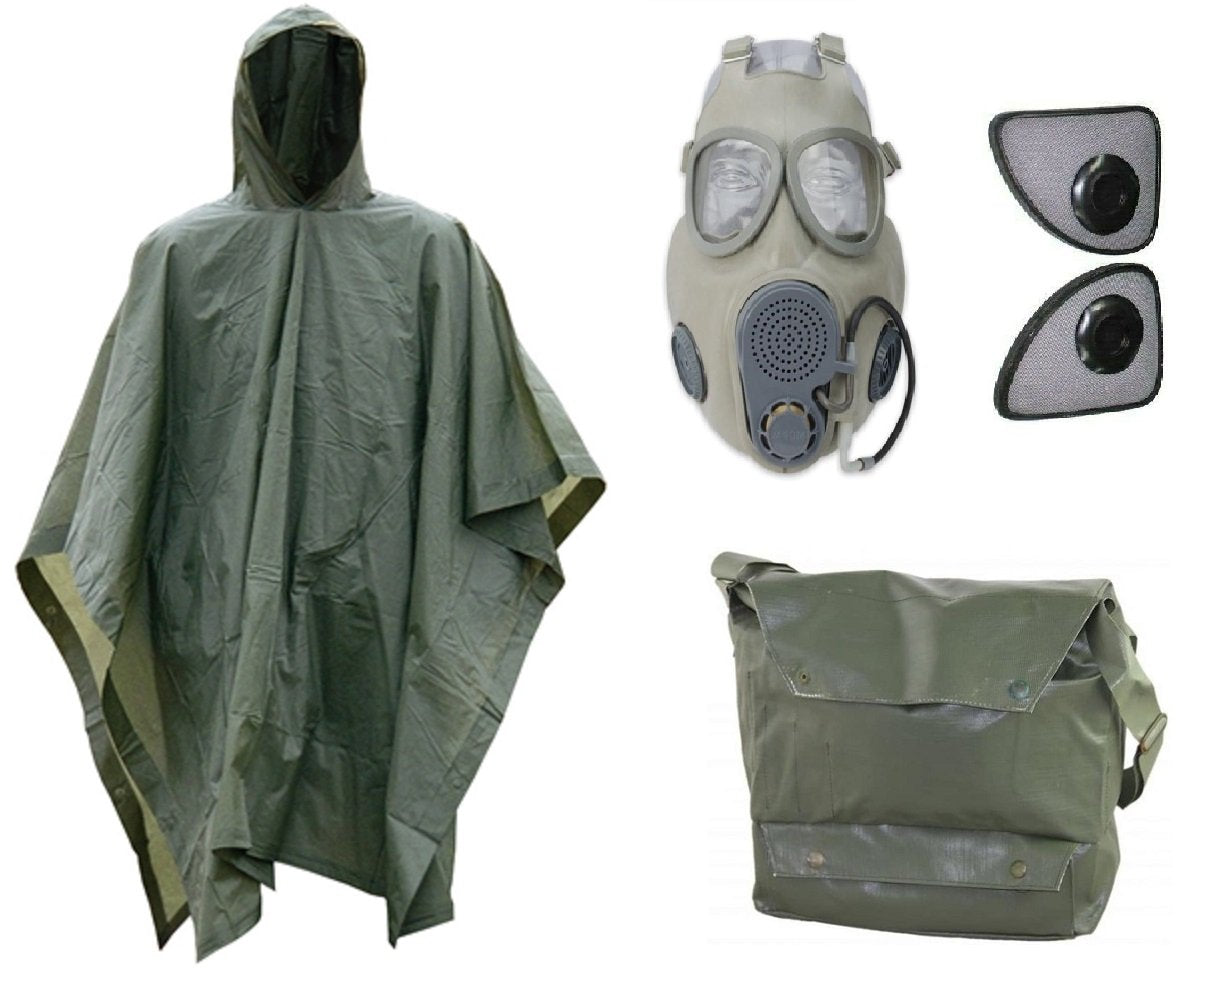 Halloween Costume Kit: Be Ready Zombie Apocalypse with Military Gas Mask M10M, Vinyl Gas Mask Bag, and OD Green Poncho Cape.